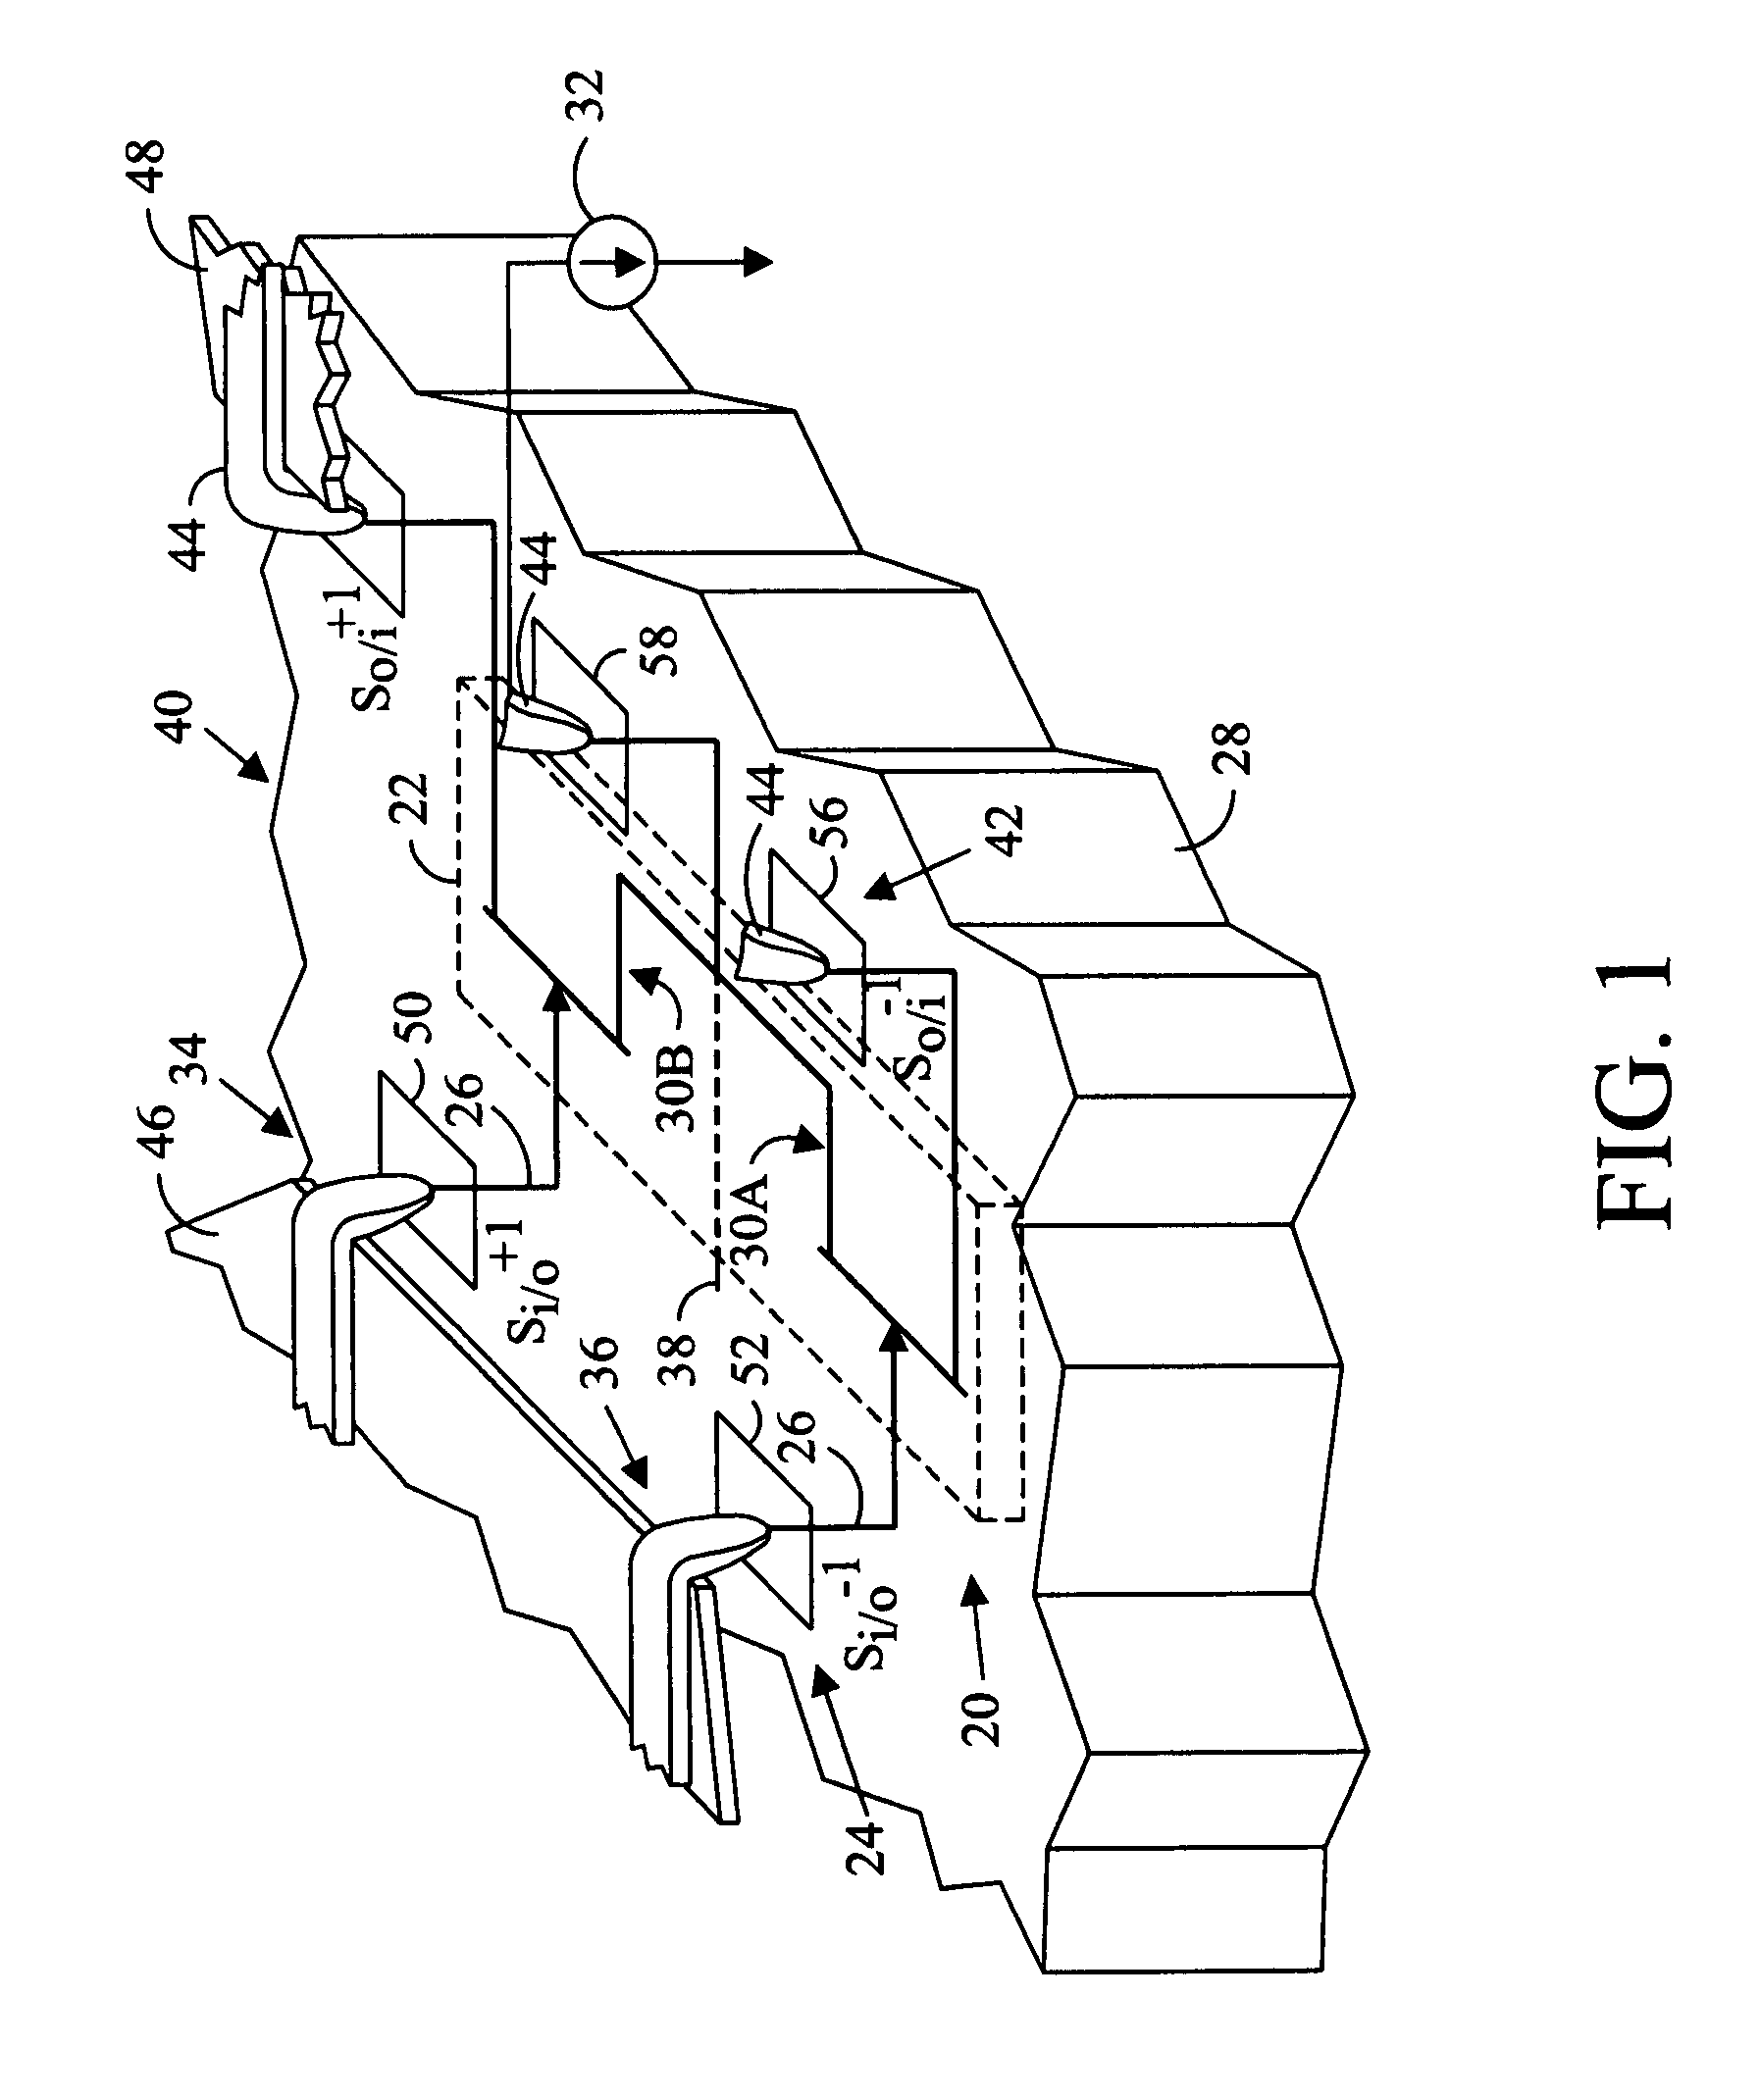 Differential signal probing system